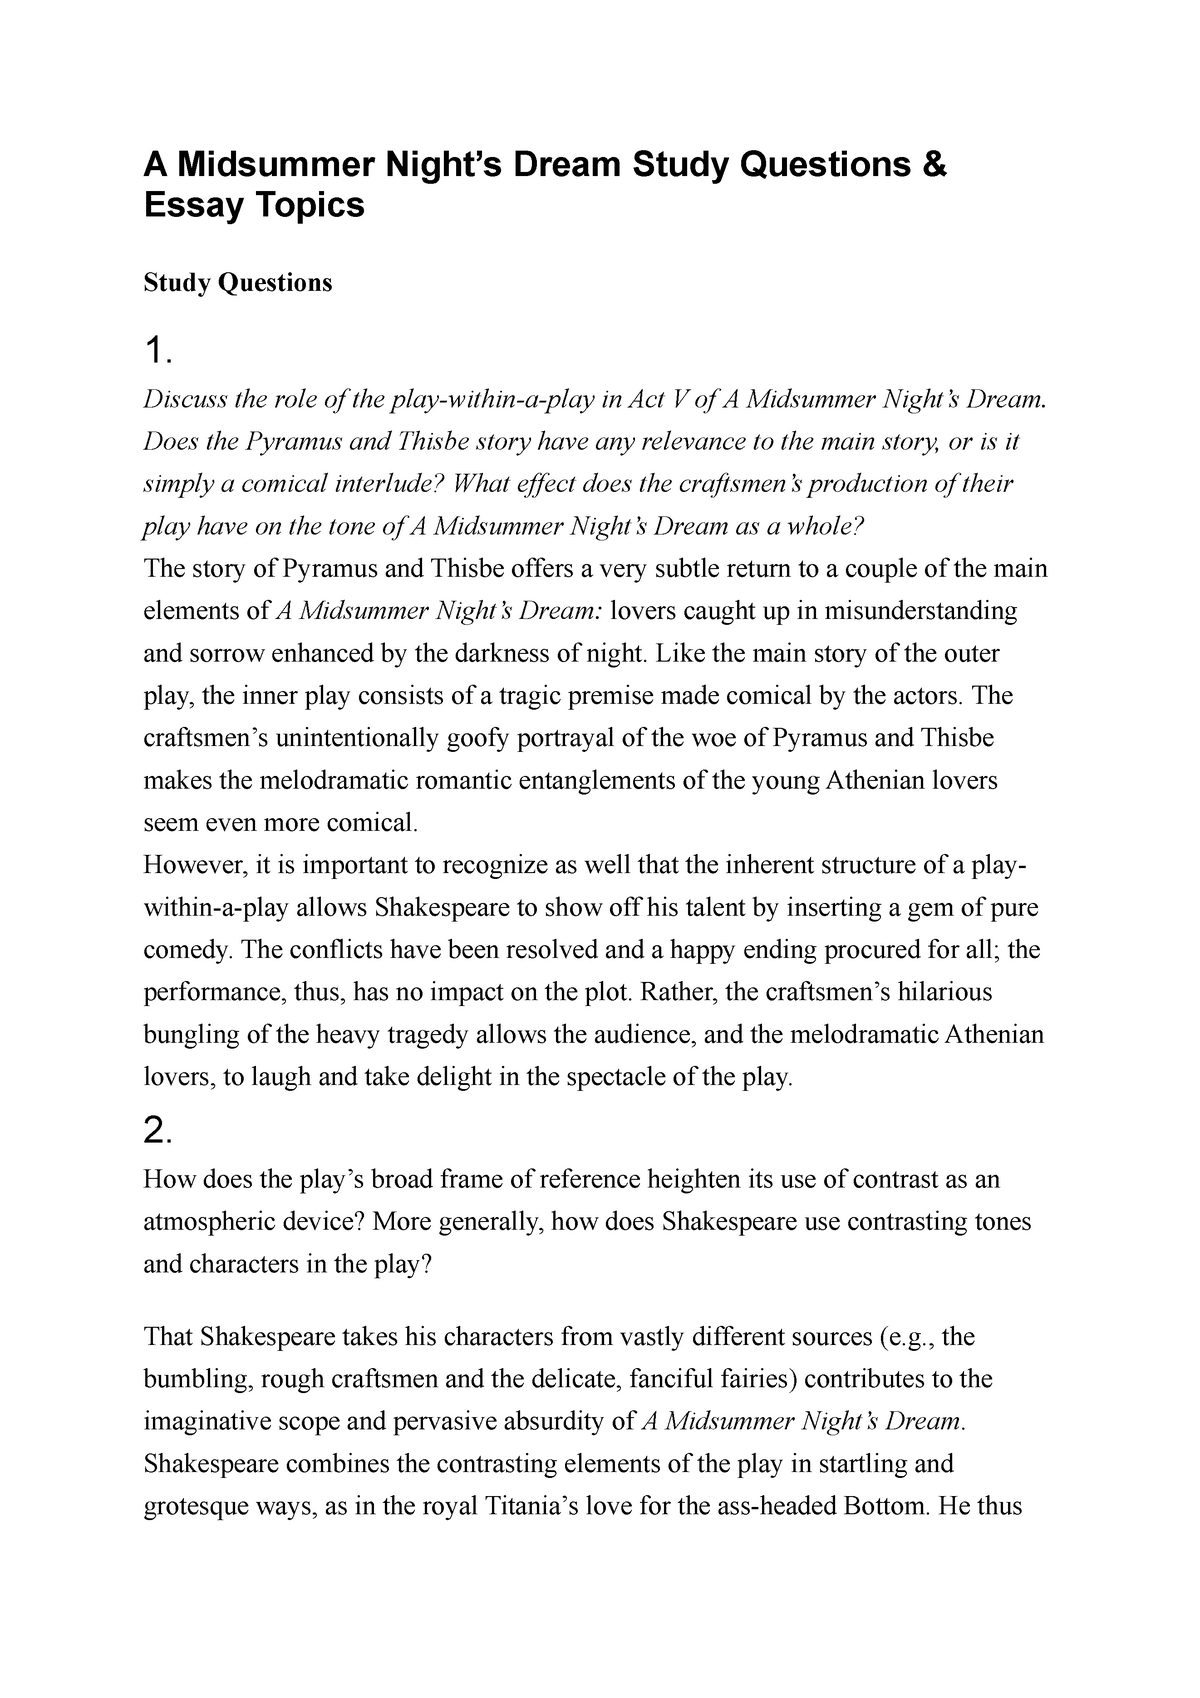 a midsummer night's dream essay questions and answers